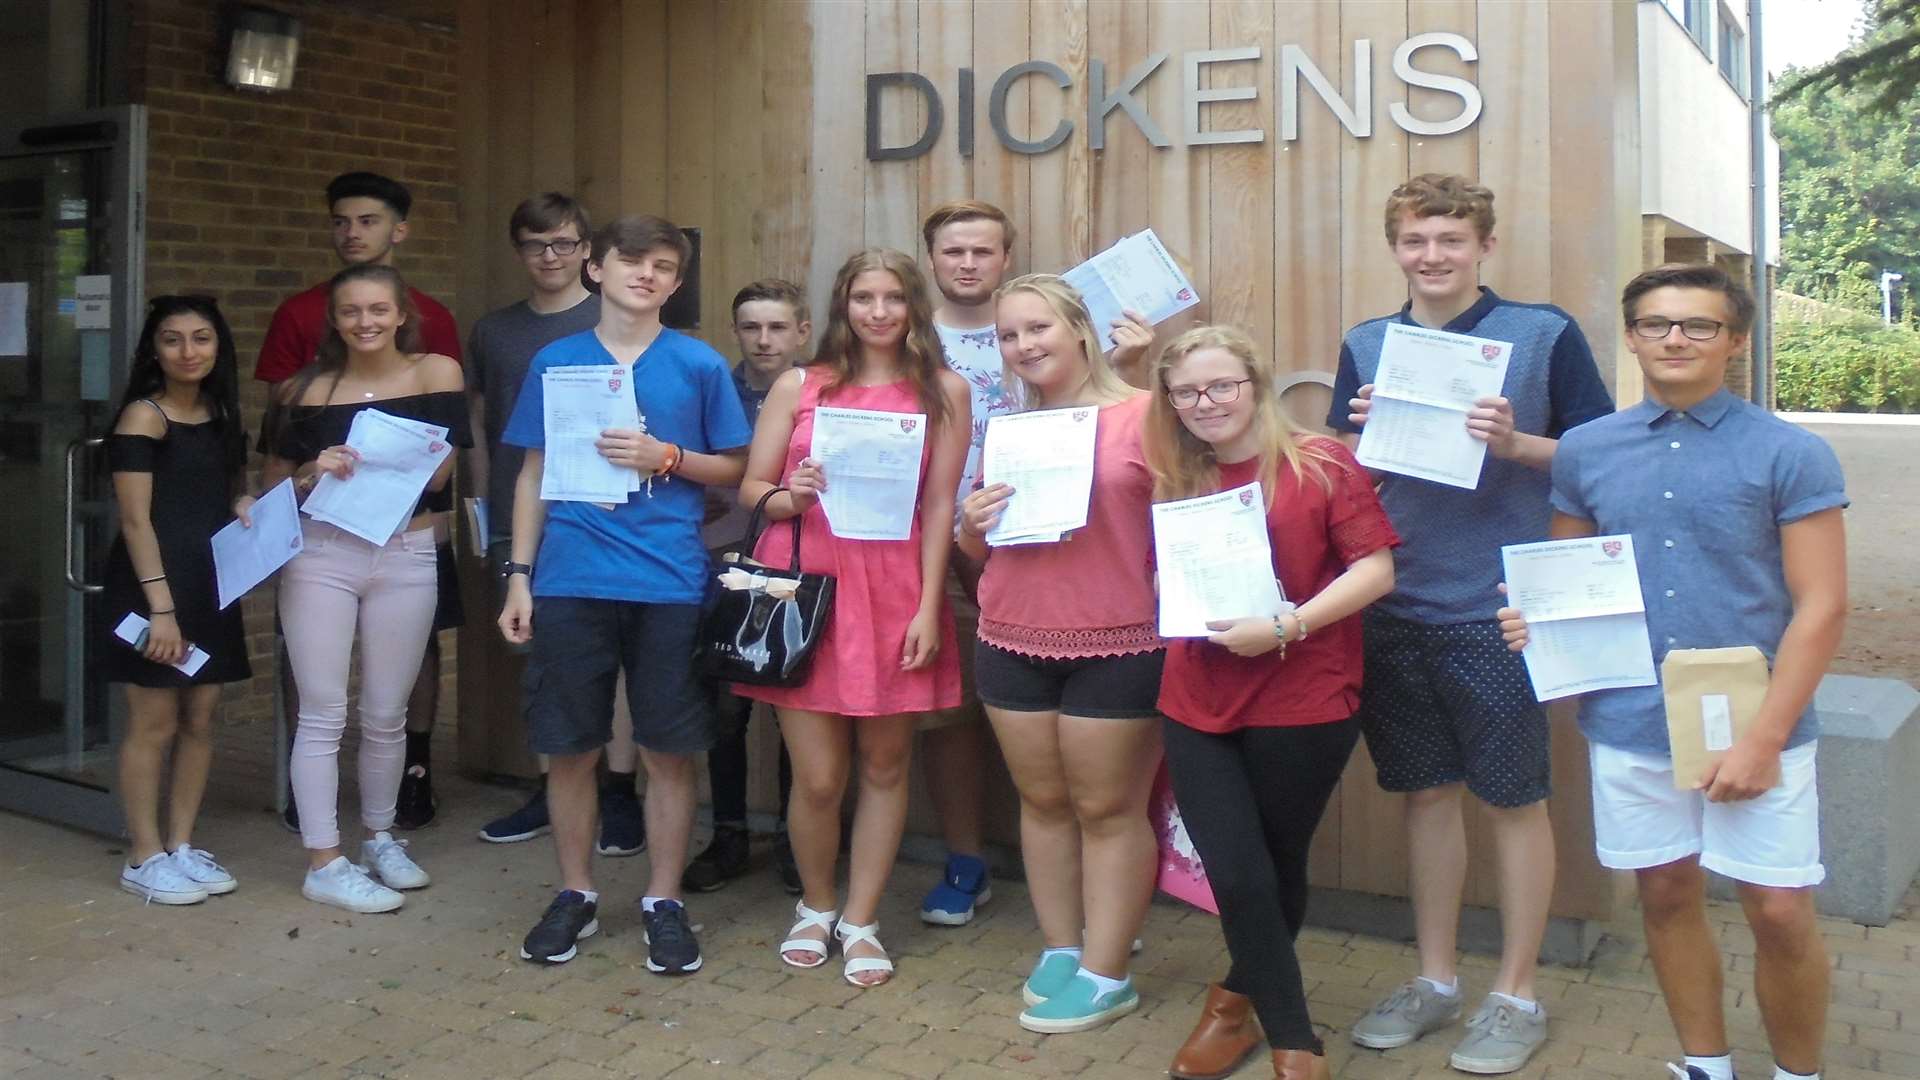 Students at The Charles Dickens School celebrate their GCSE results